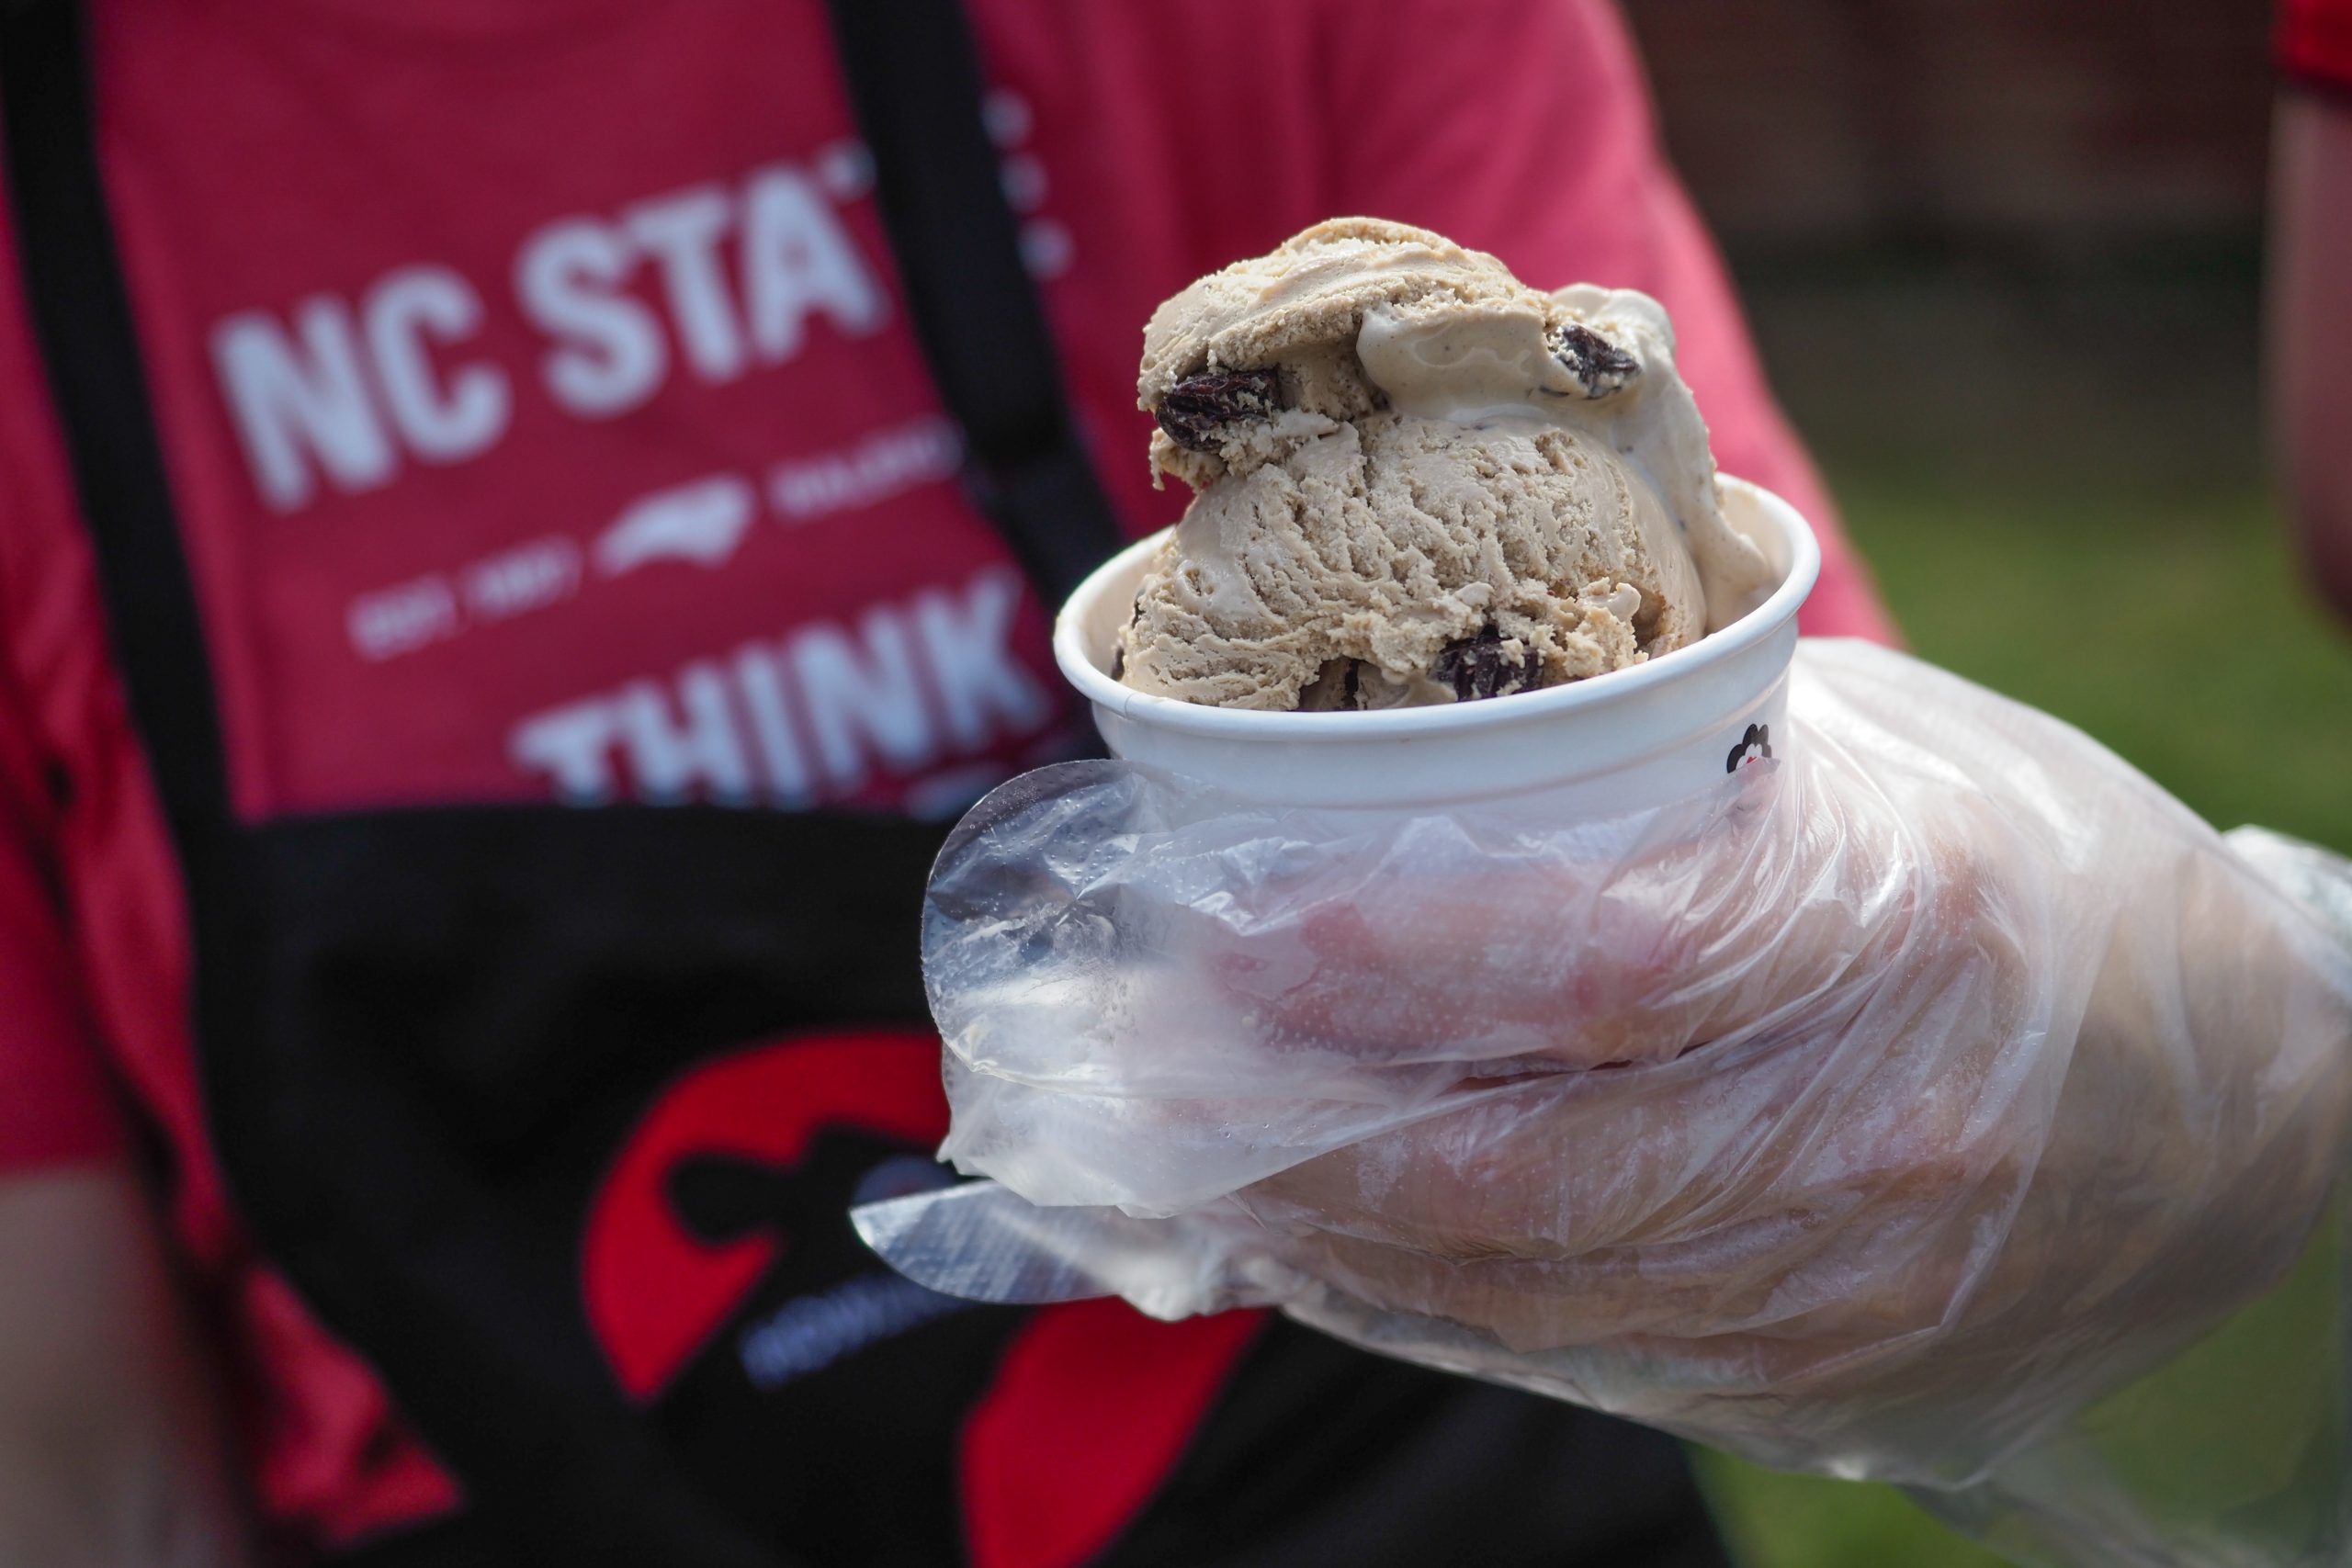 image of a howling cow creamery cup of ice cream